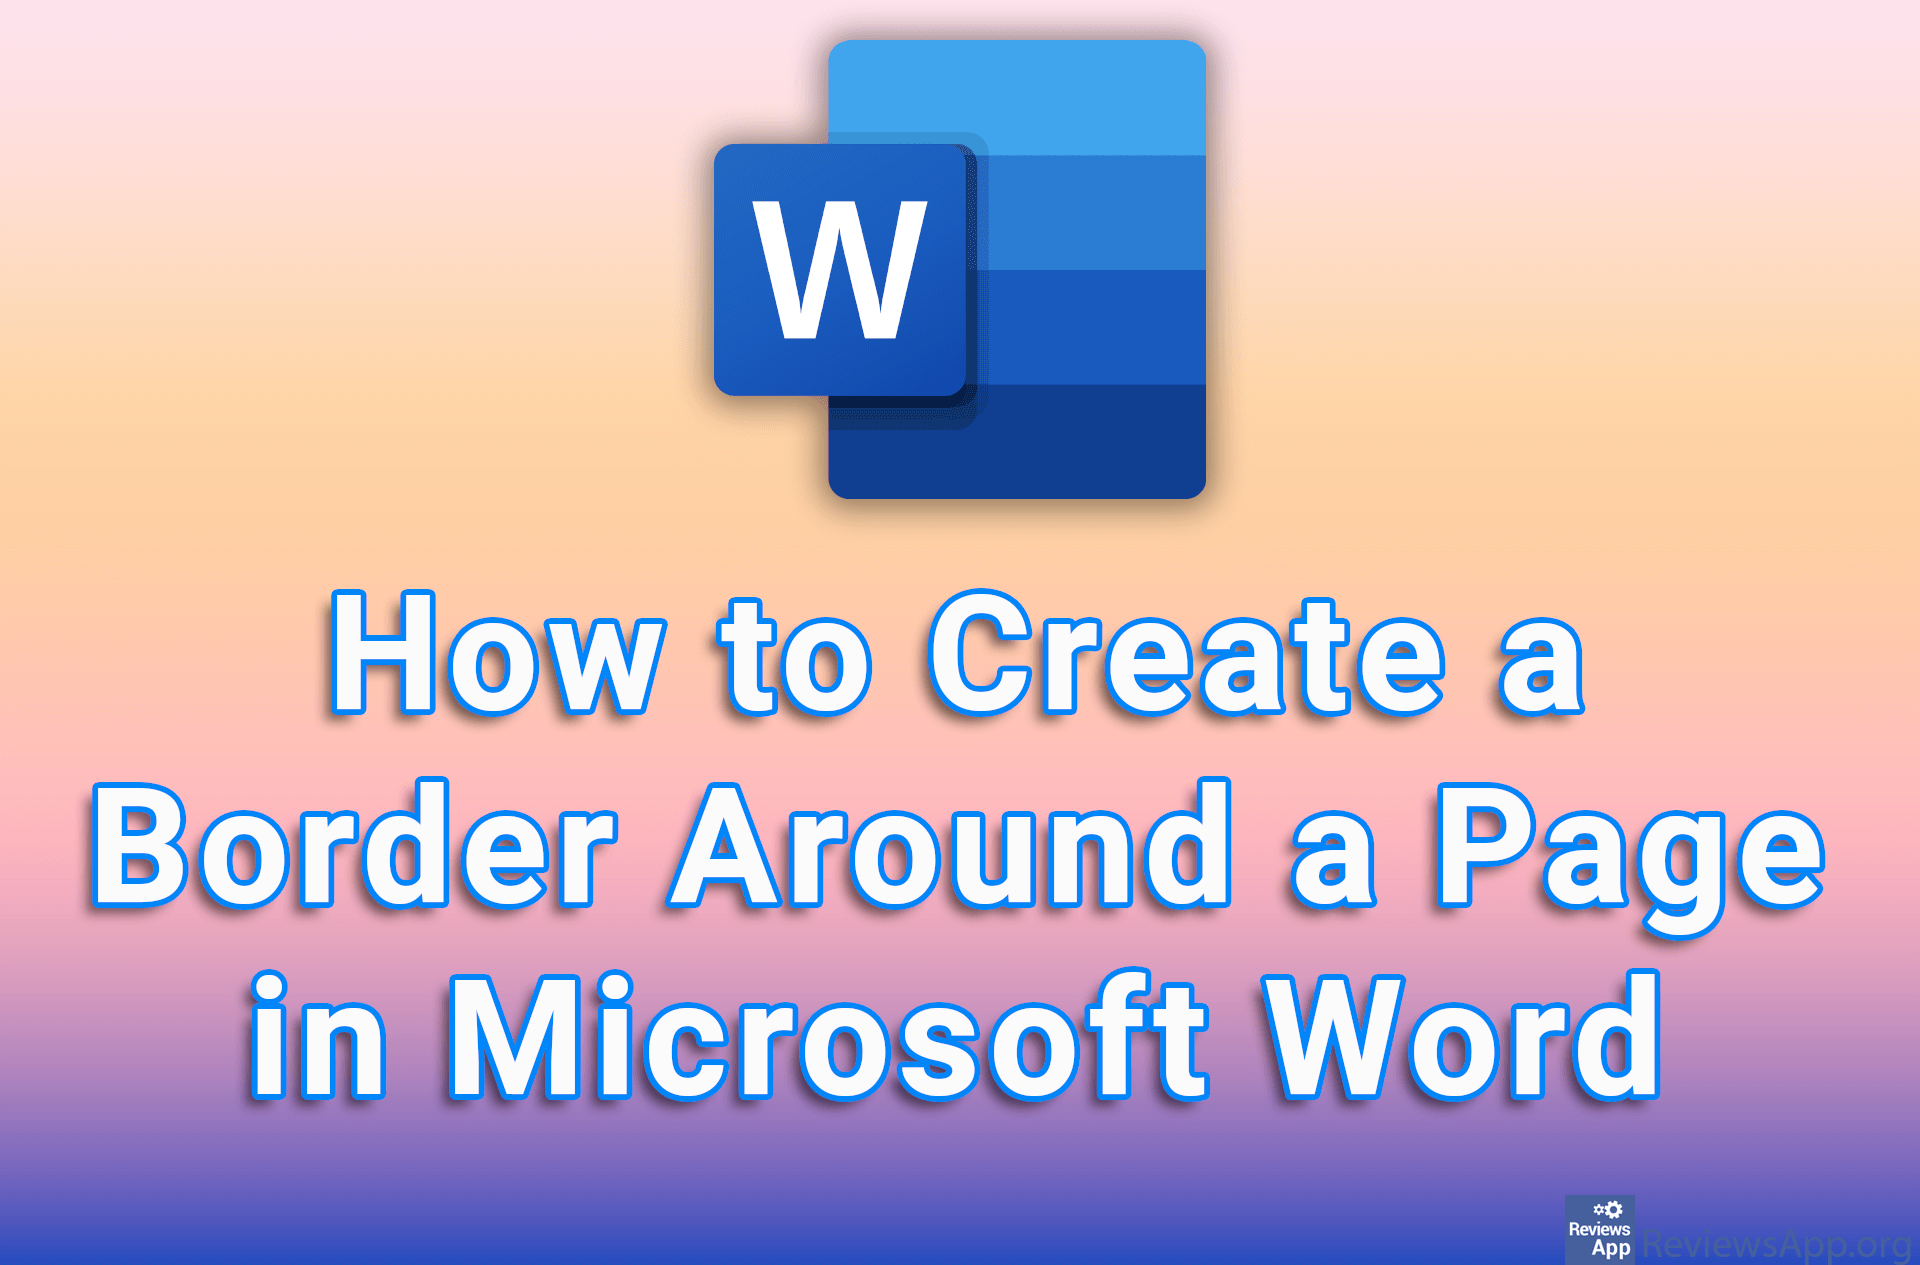 How to Create a Border Around a Page in Microsoft Word